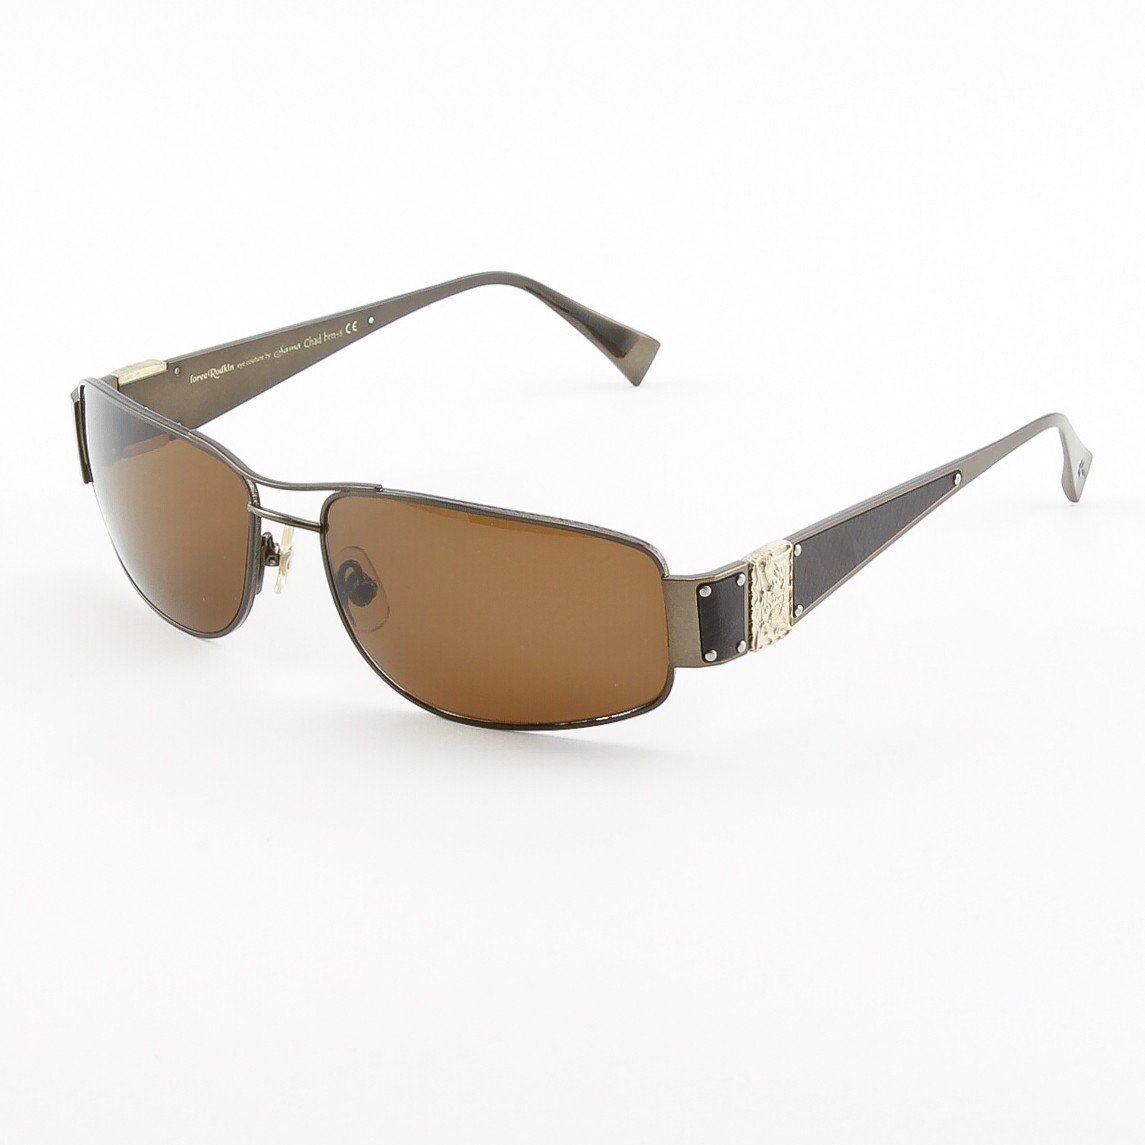 Loree Rodkin Chad Sunglasses by Sama Col. Brown with Brown Lenses ...